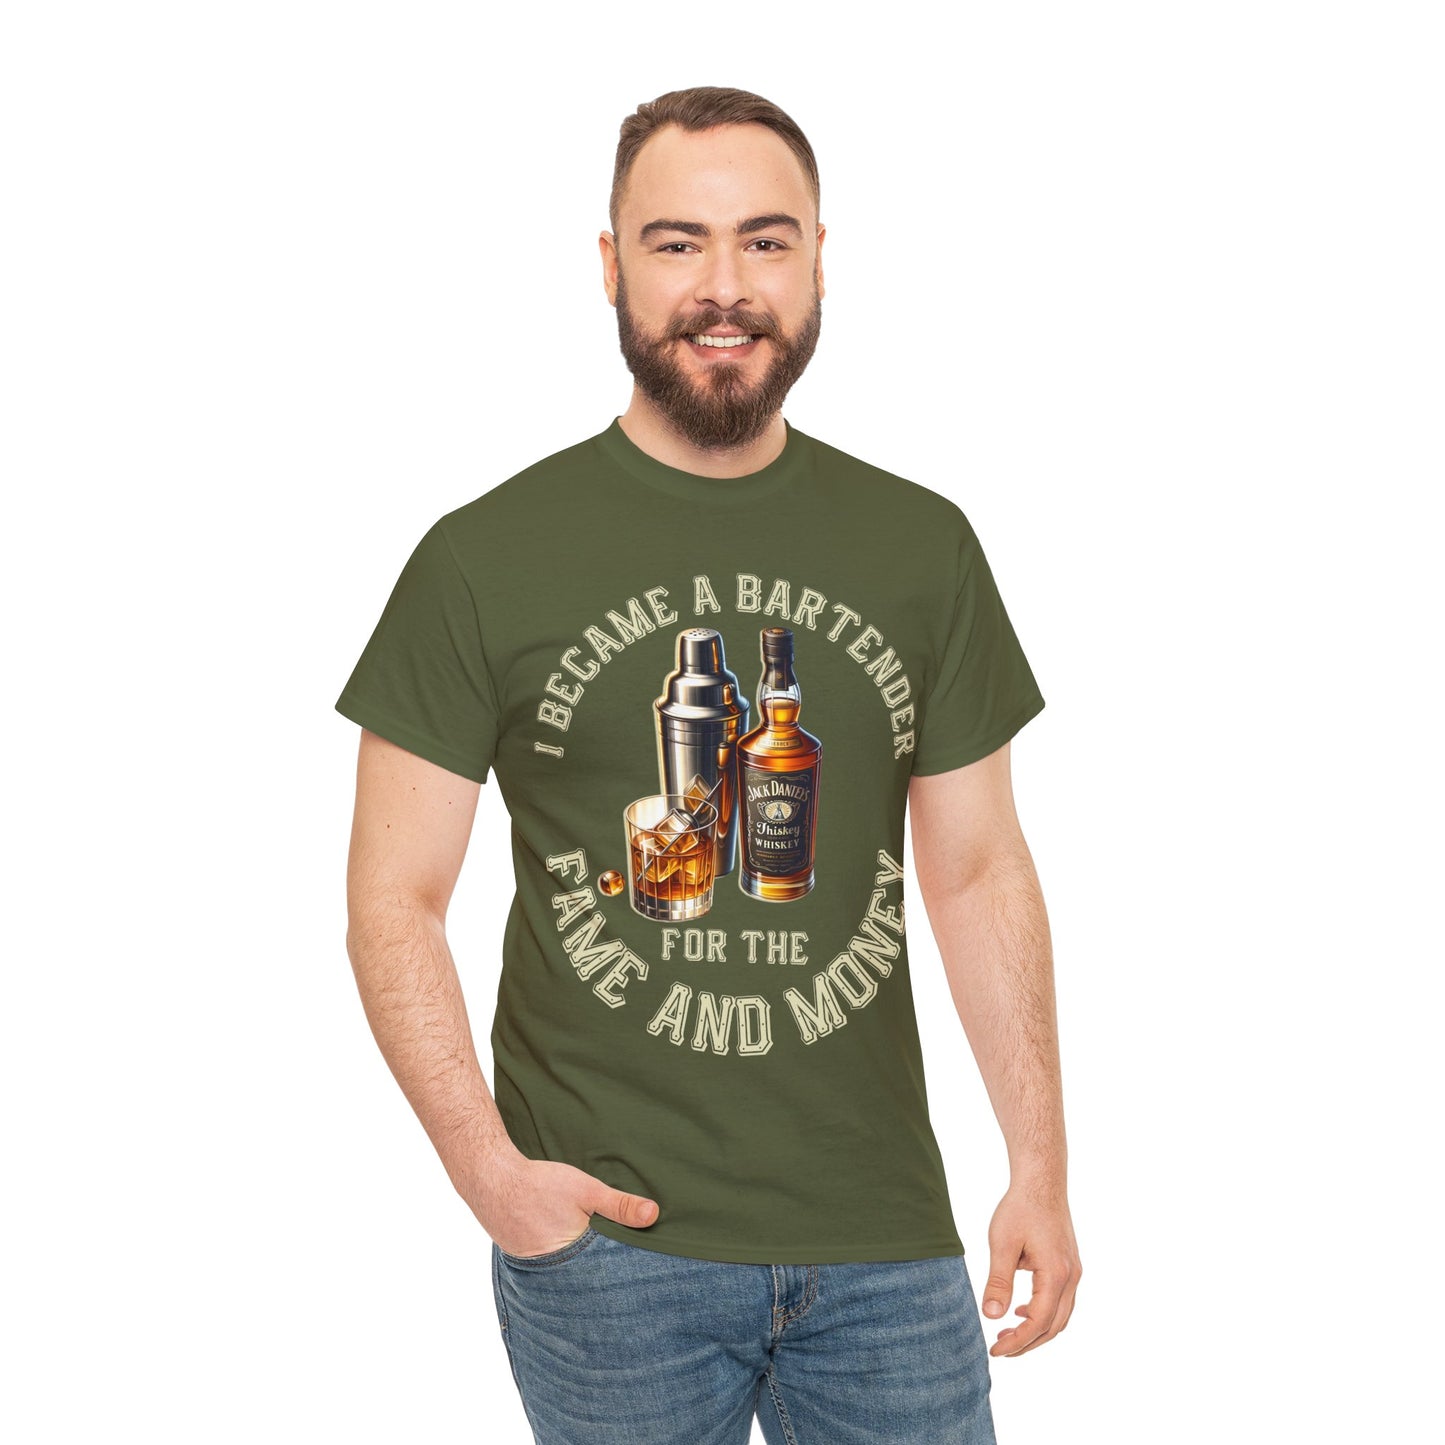 BARTENDER FAME AND MONEY ON FRONT  Unisex Heavy Cotton Tee